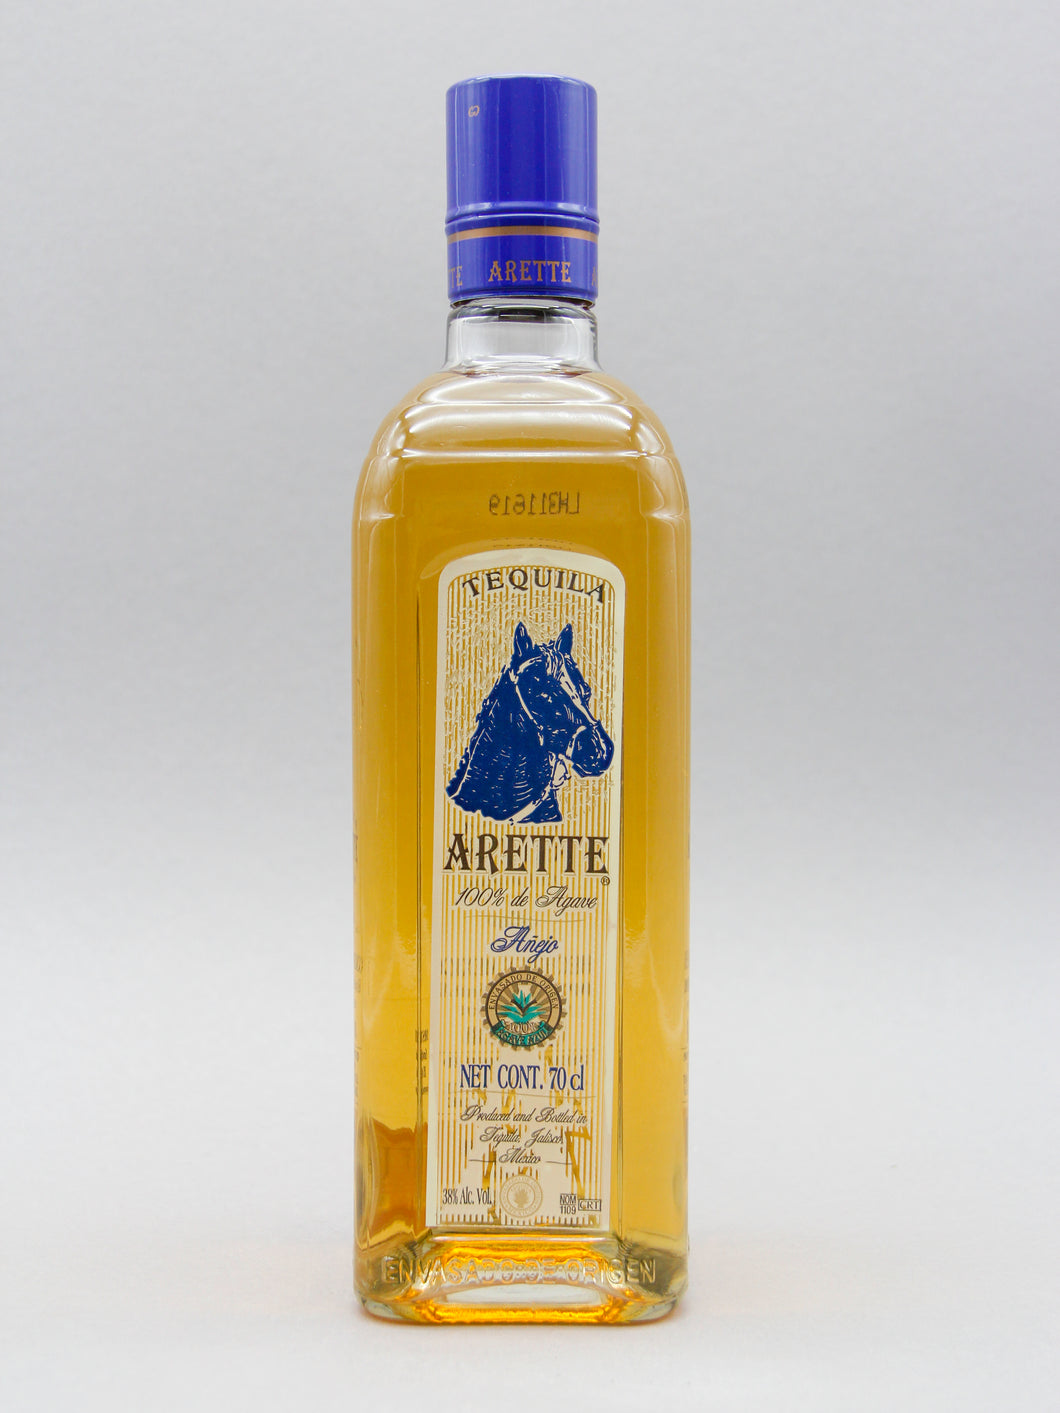 Arette Anejo Tequila 100% Agave (38%, 70cl)